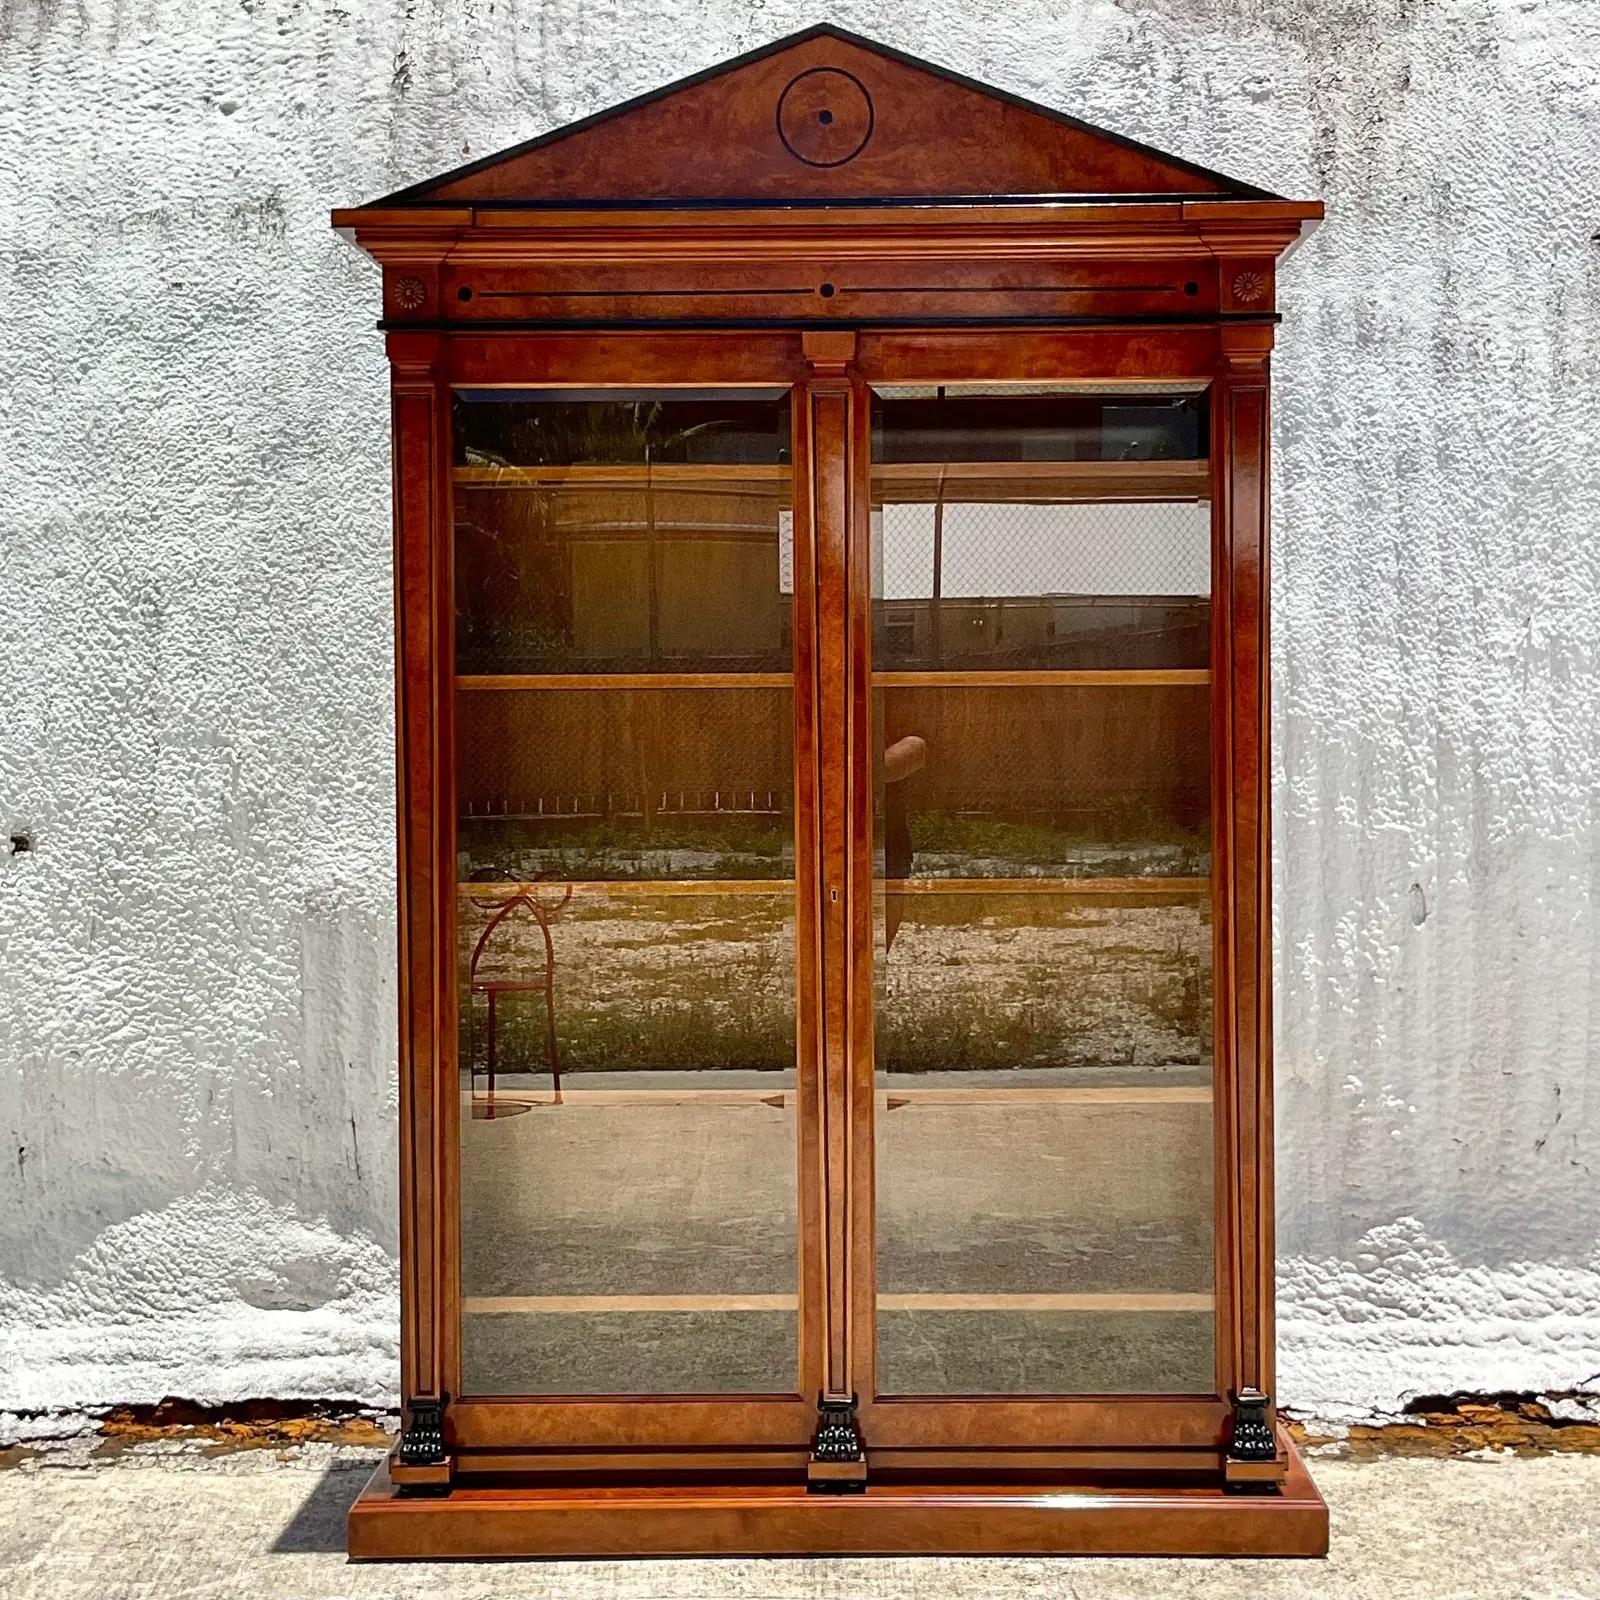 Incredible vintage custom built Bourbon cabinet. Made by the iconic KPS in Chicago. Beautiful towering pediment frame with inset glass doors and wooden shelves. Perfect for the Bourbon collector or as a home for any of your collections. A truly